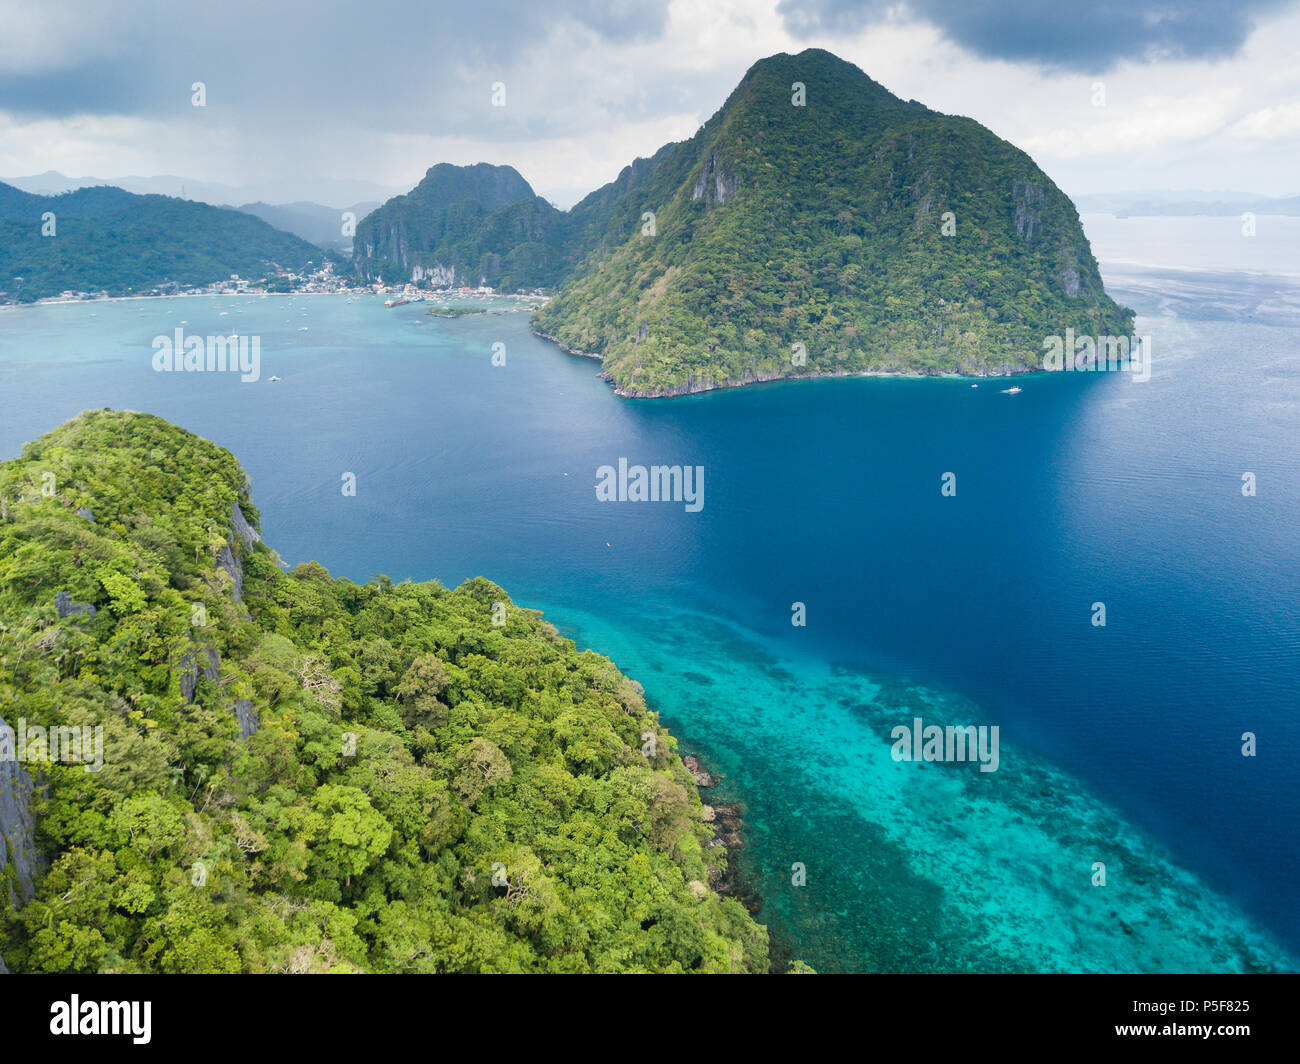 Aerial view of the town of El Nido from the island of Cadlao Stock Photo